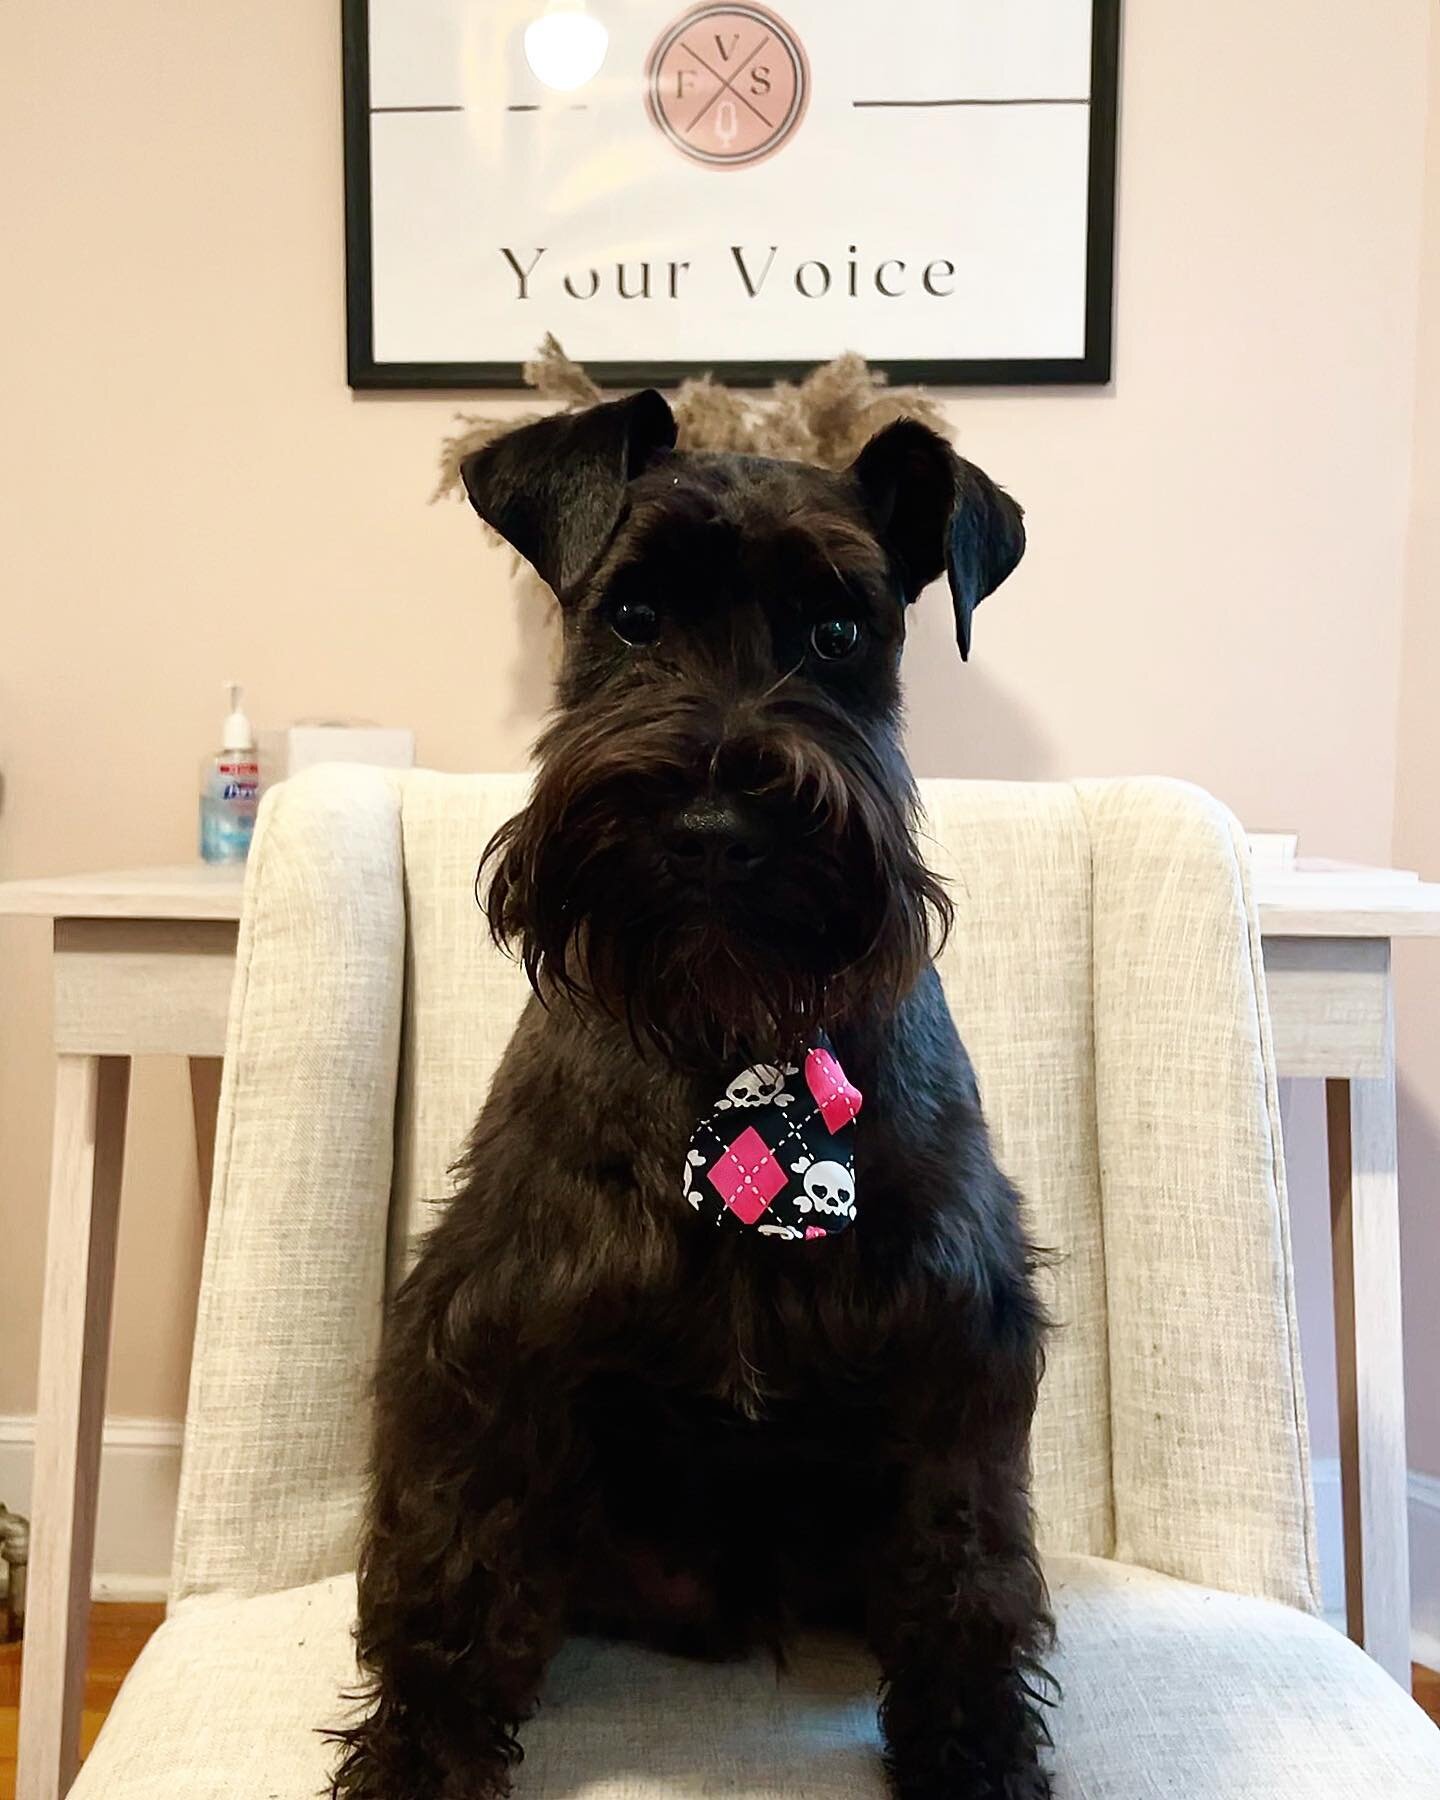 Meet our studio ambassador, Gatsby! In addition to helping with admin tasks (𝙡𝙞𝙠𝙚 𝙧𝙚𝙢𝙞𝙣𝙙𝙞𝙣𝙜 𝙮𝙤𝙪 𝙩𝙤 𝙧𝙚𝙜𝙞𝙨𝙩𝙚𝙧 𝙛𝙤𝙧 𝙛𝙖𝙡𝙡 𝙫𝙤𝙞𝙘𝙚 𝙡𝙚𝙨𝙨𝙤𝙣𝙨), Gatsby will be popping into your feed with motivational tips &amp; pract